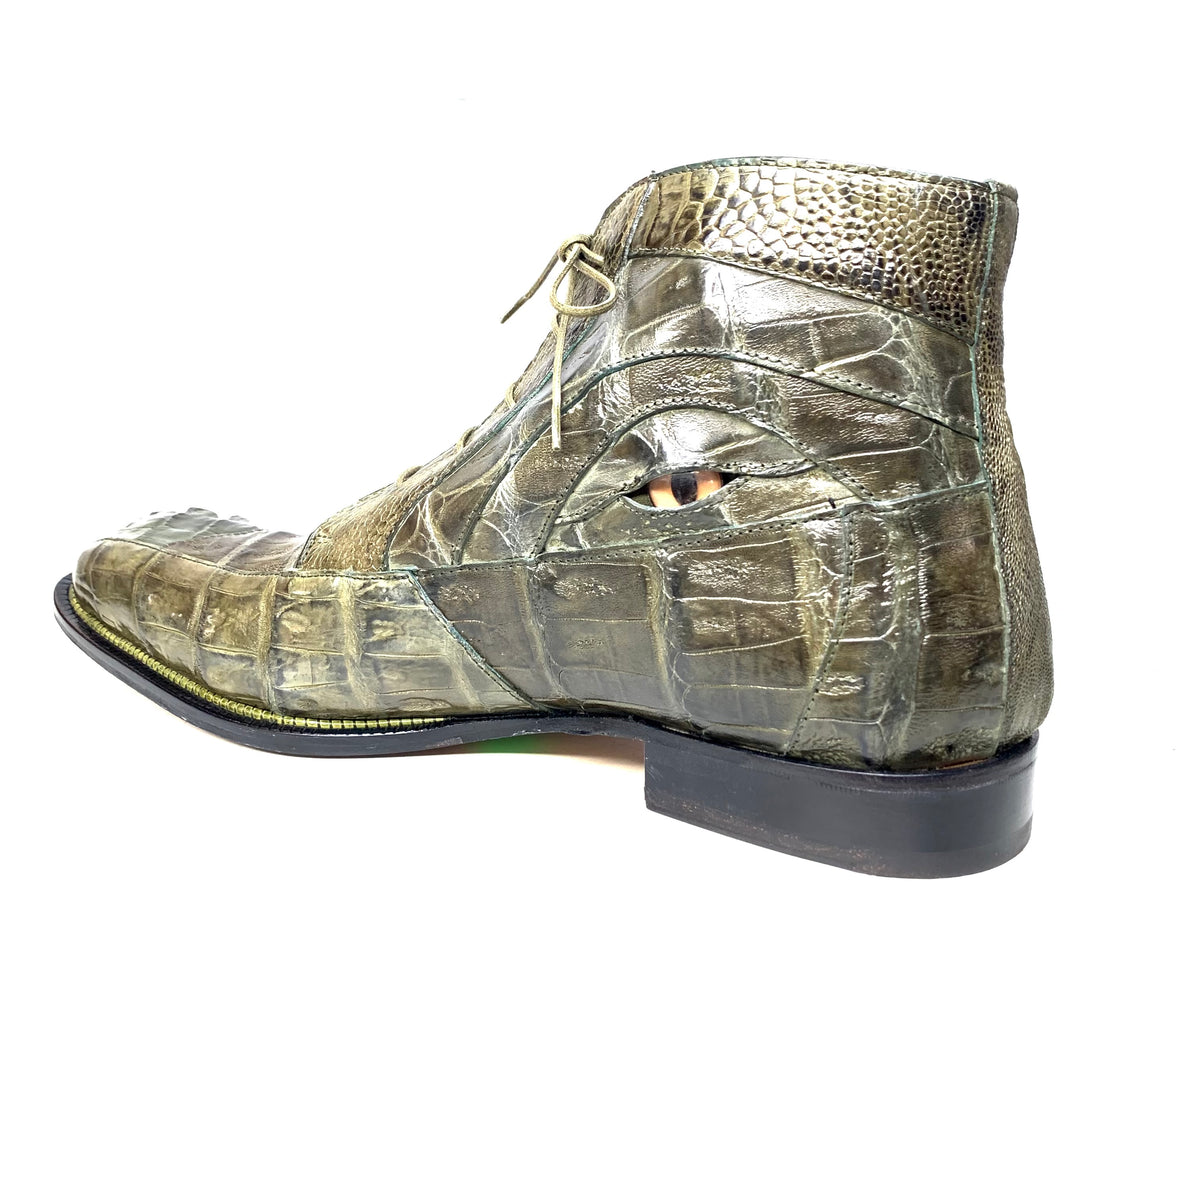 Mauri-3079 "Eye" Olive Green Alligator Tail / Ostrich Leg Dress Ankle Boots - Dudes Boutique